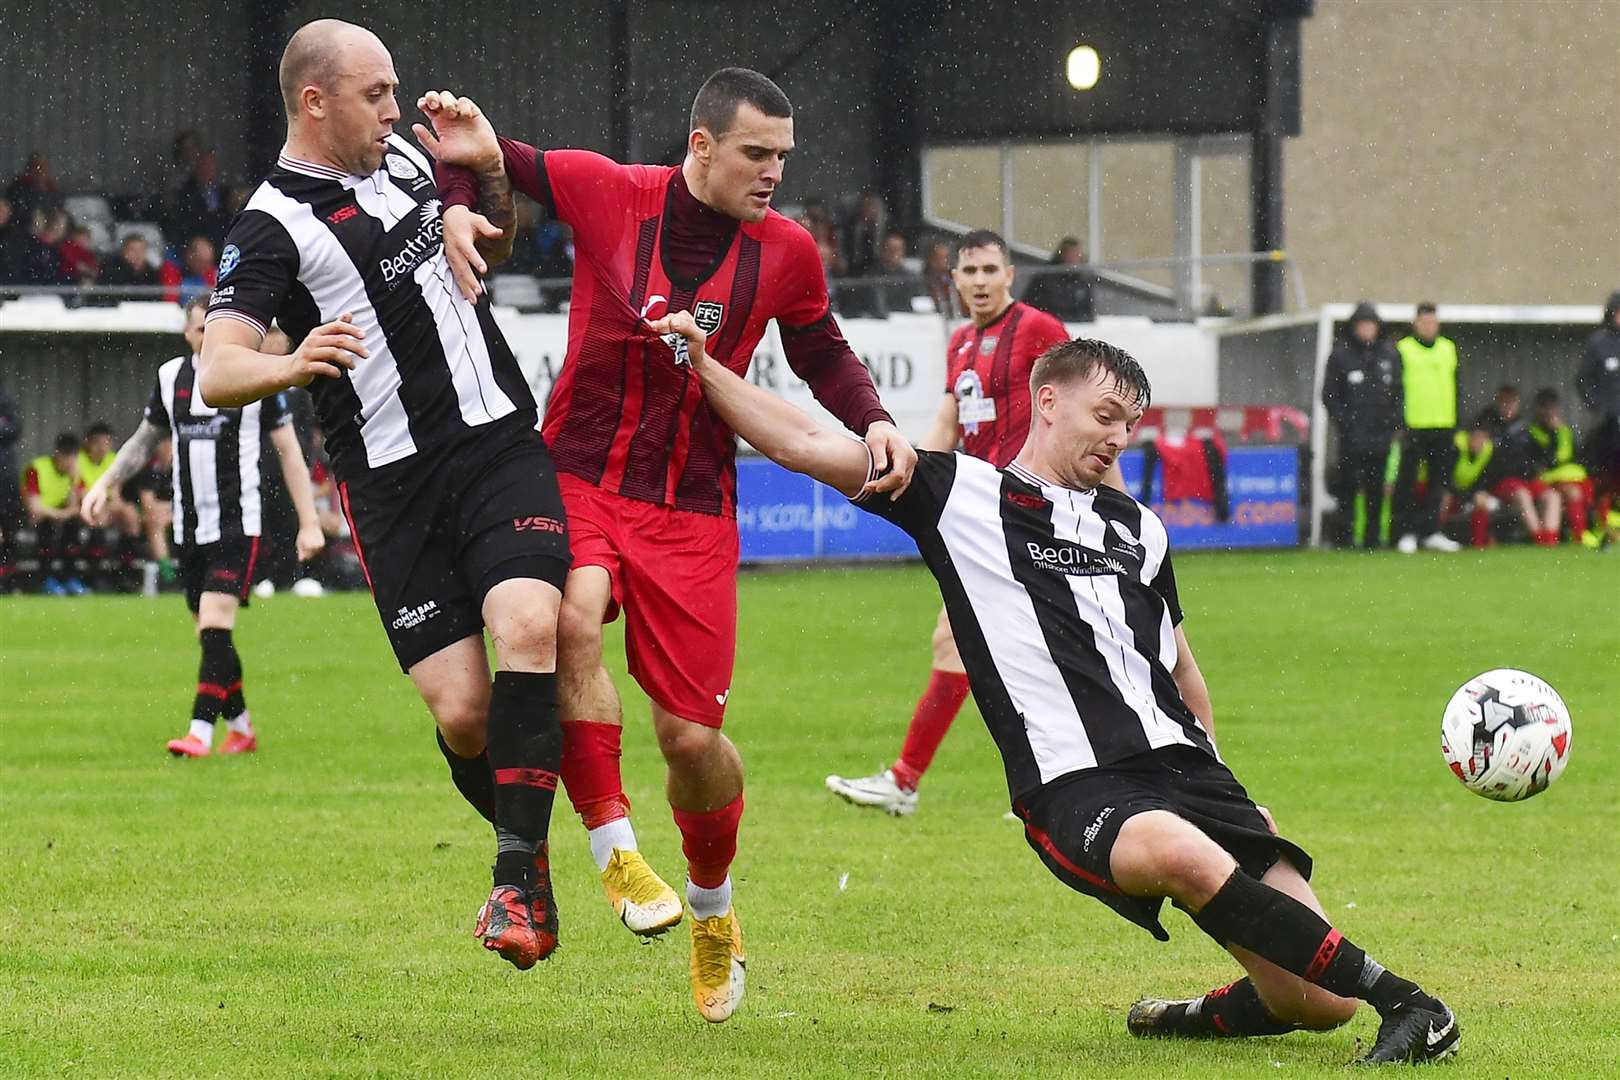 Andy Hardwick (right) clears the danger from Fraserburgh's Scott Barbour, with Danny Mackay in close attendance, when the teams met in Wick in September. Hardwick and Mackay will both be missing for the trip to Bellslea Park this weekend. Picture: Mel Roger